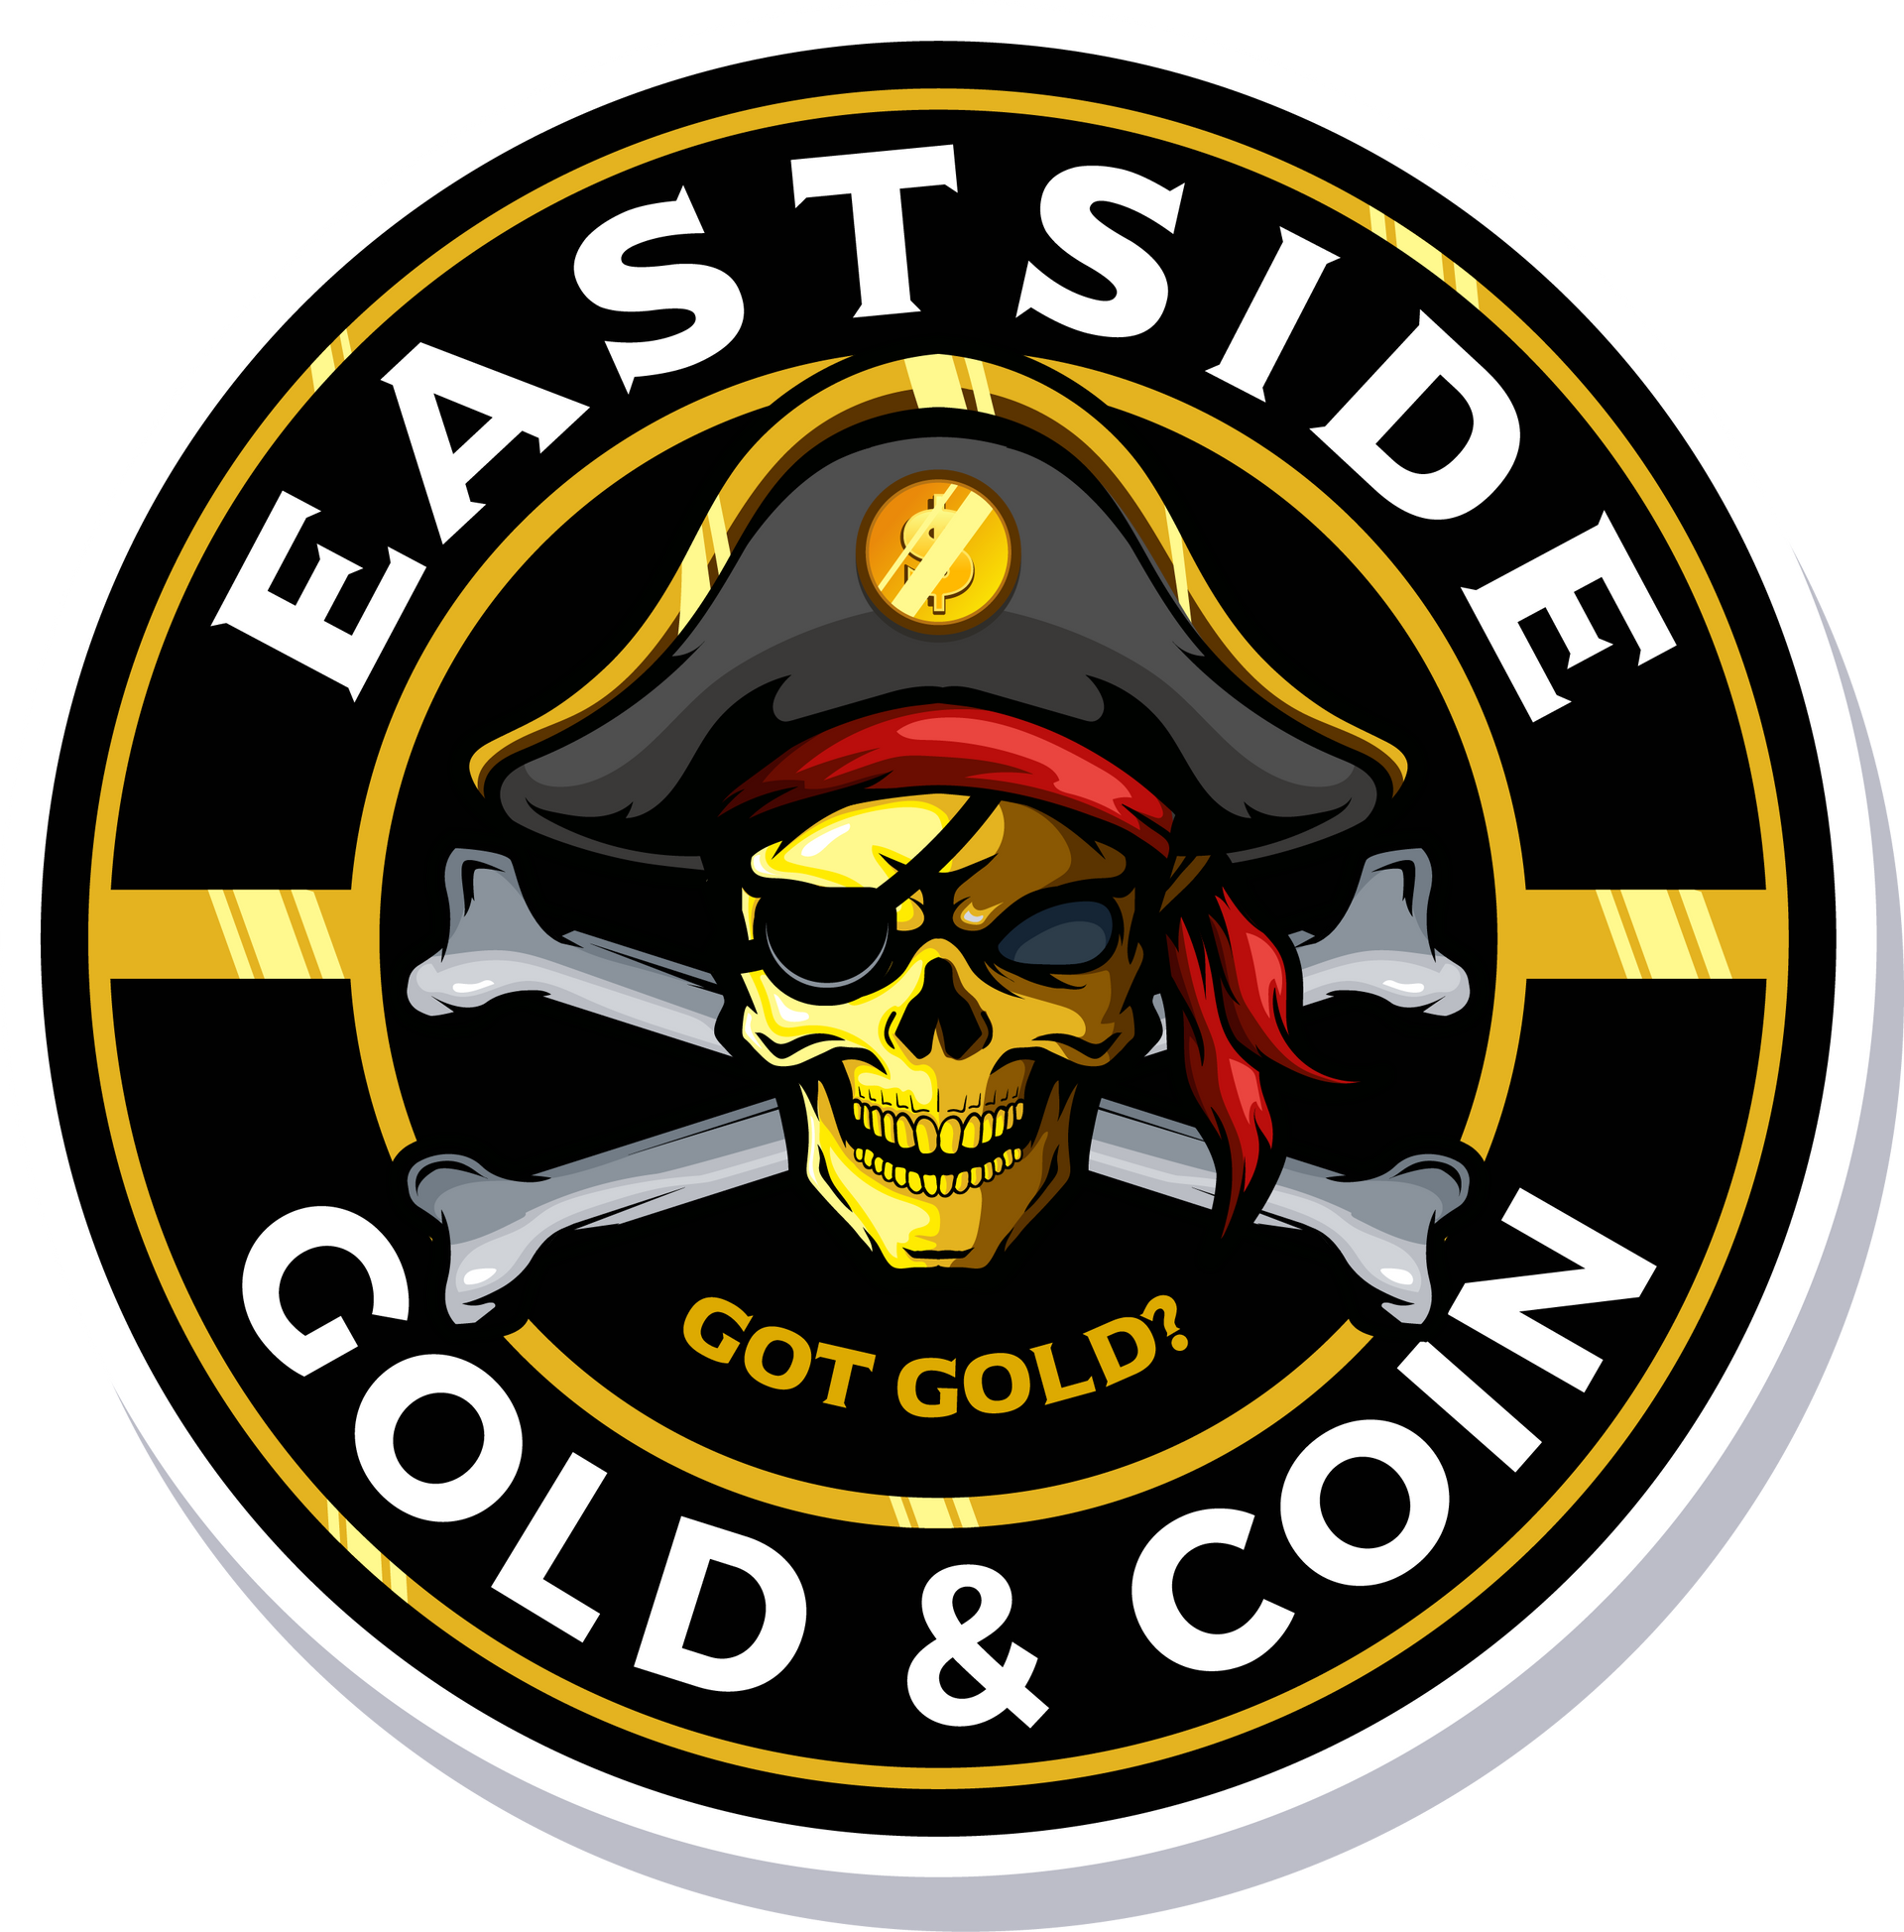 Eastside Gold and Coin Exchange